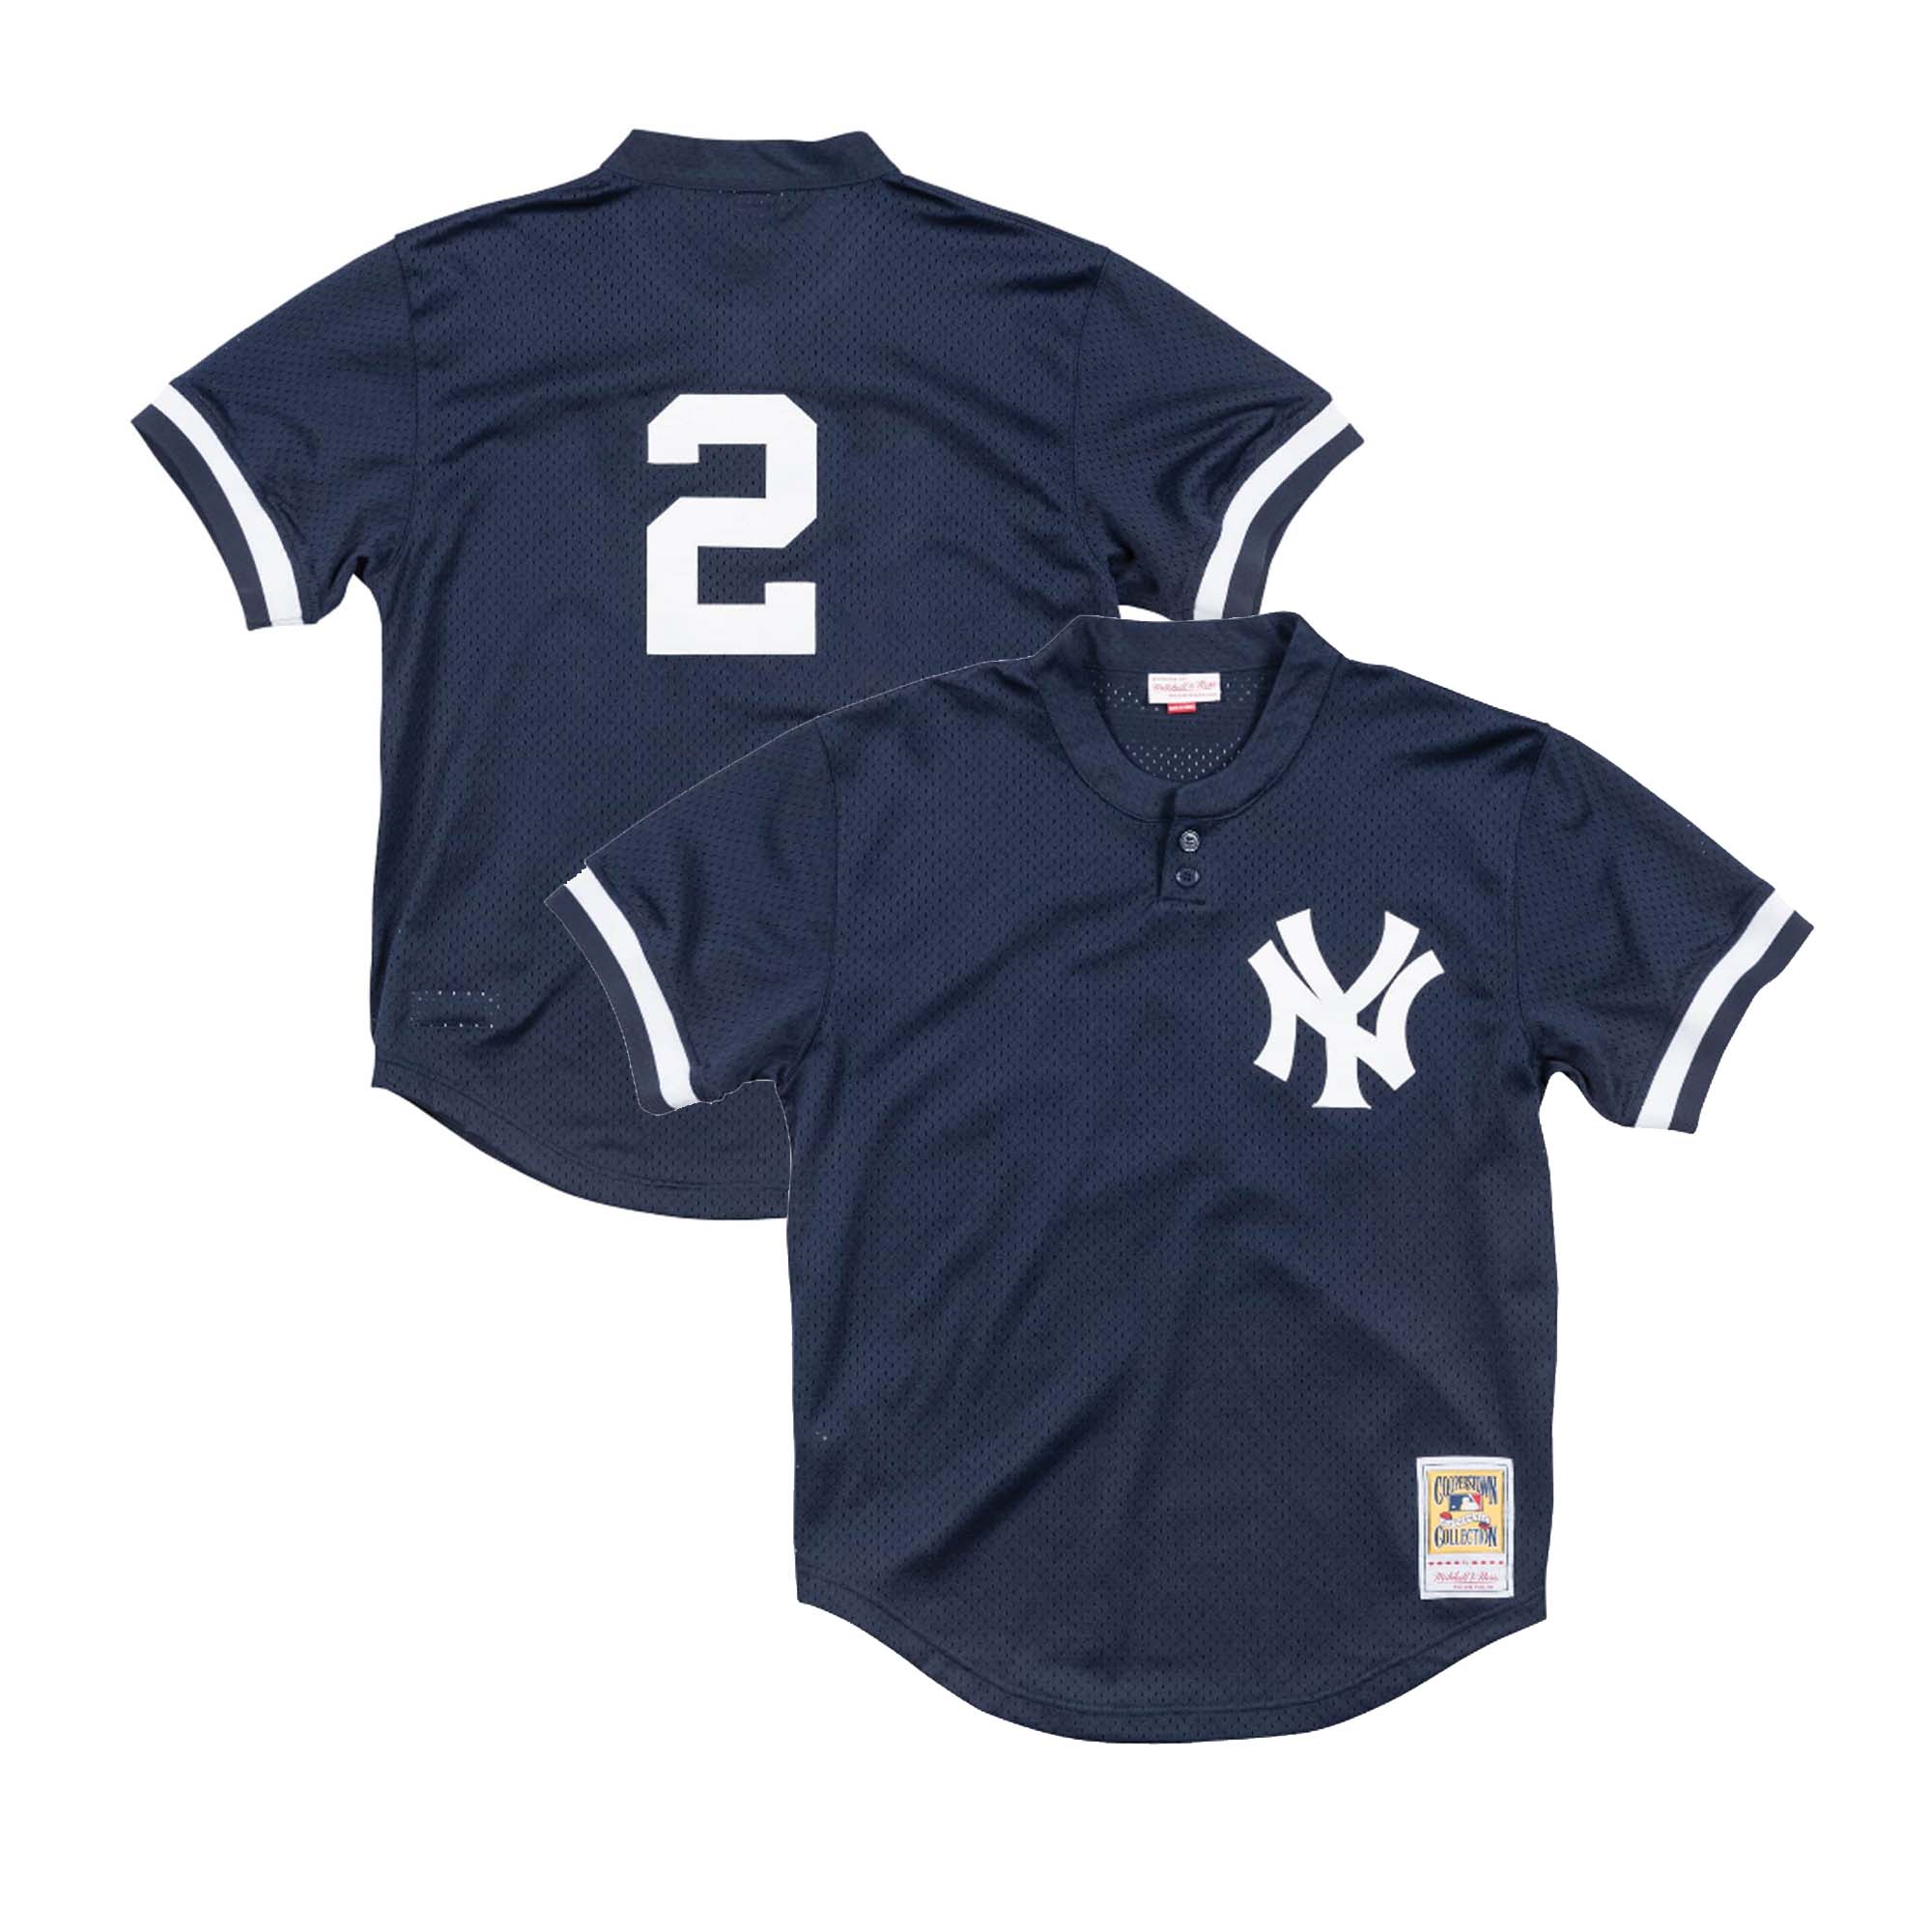 Authentic Derek Jeter New York Yankees 1998 Jersey - Shop Mitchell & Ness  Authentic Jerseys and Replicas Mitchell & Ness Nostalgia Co.